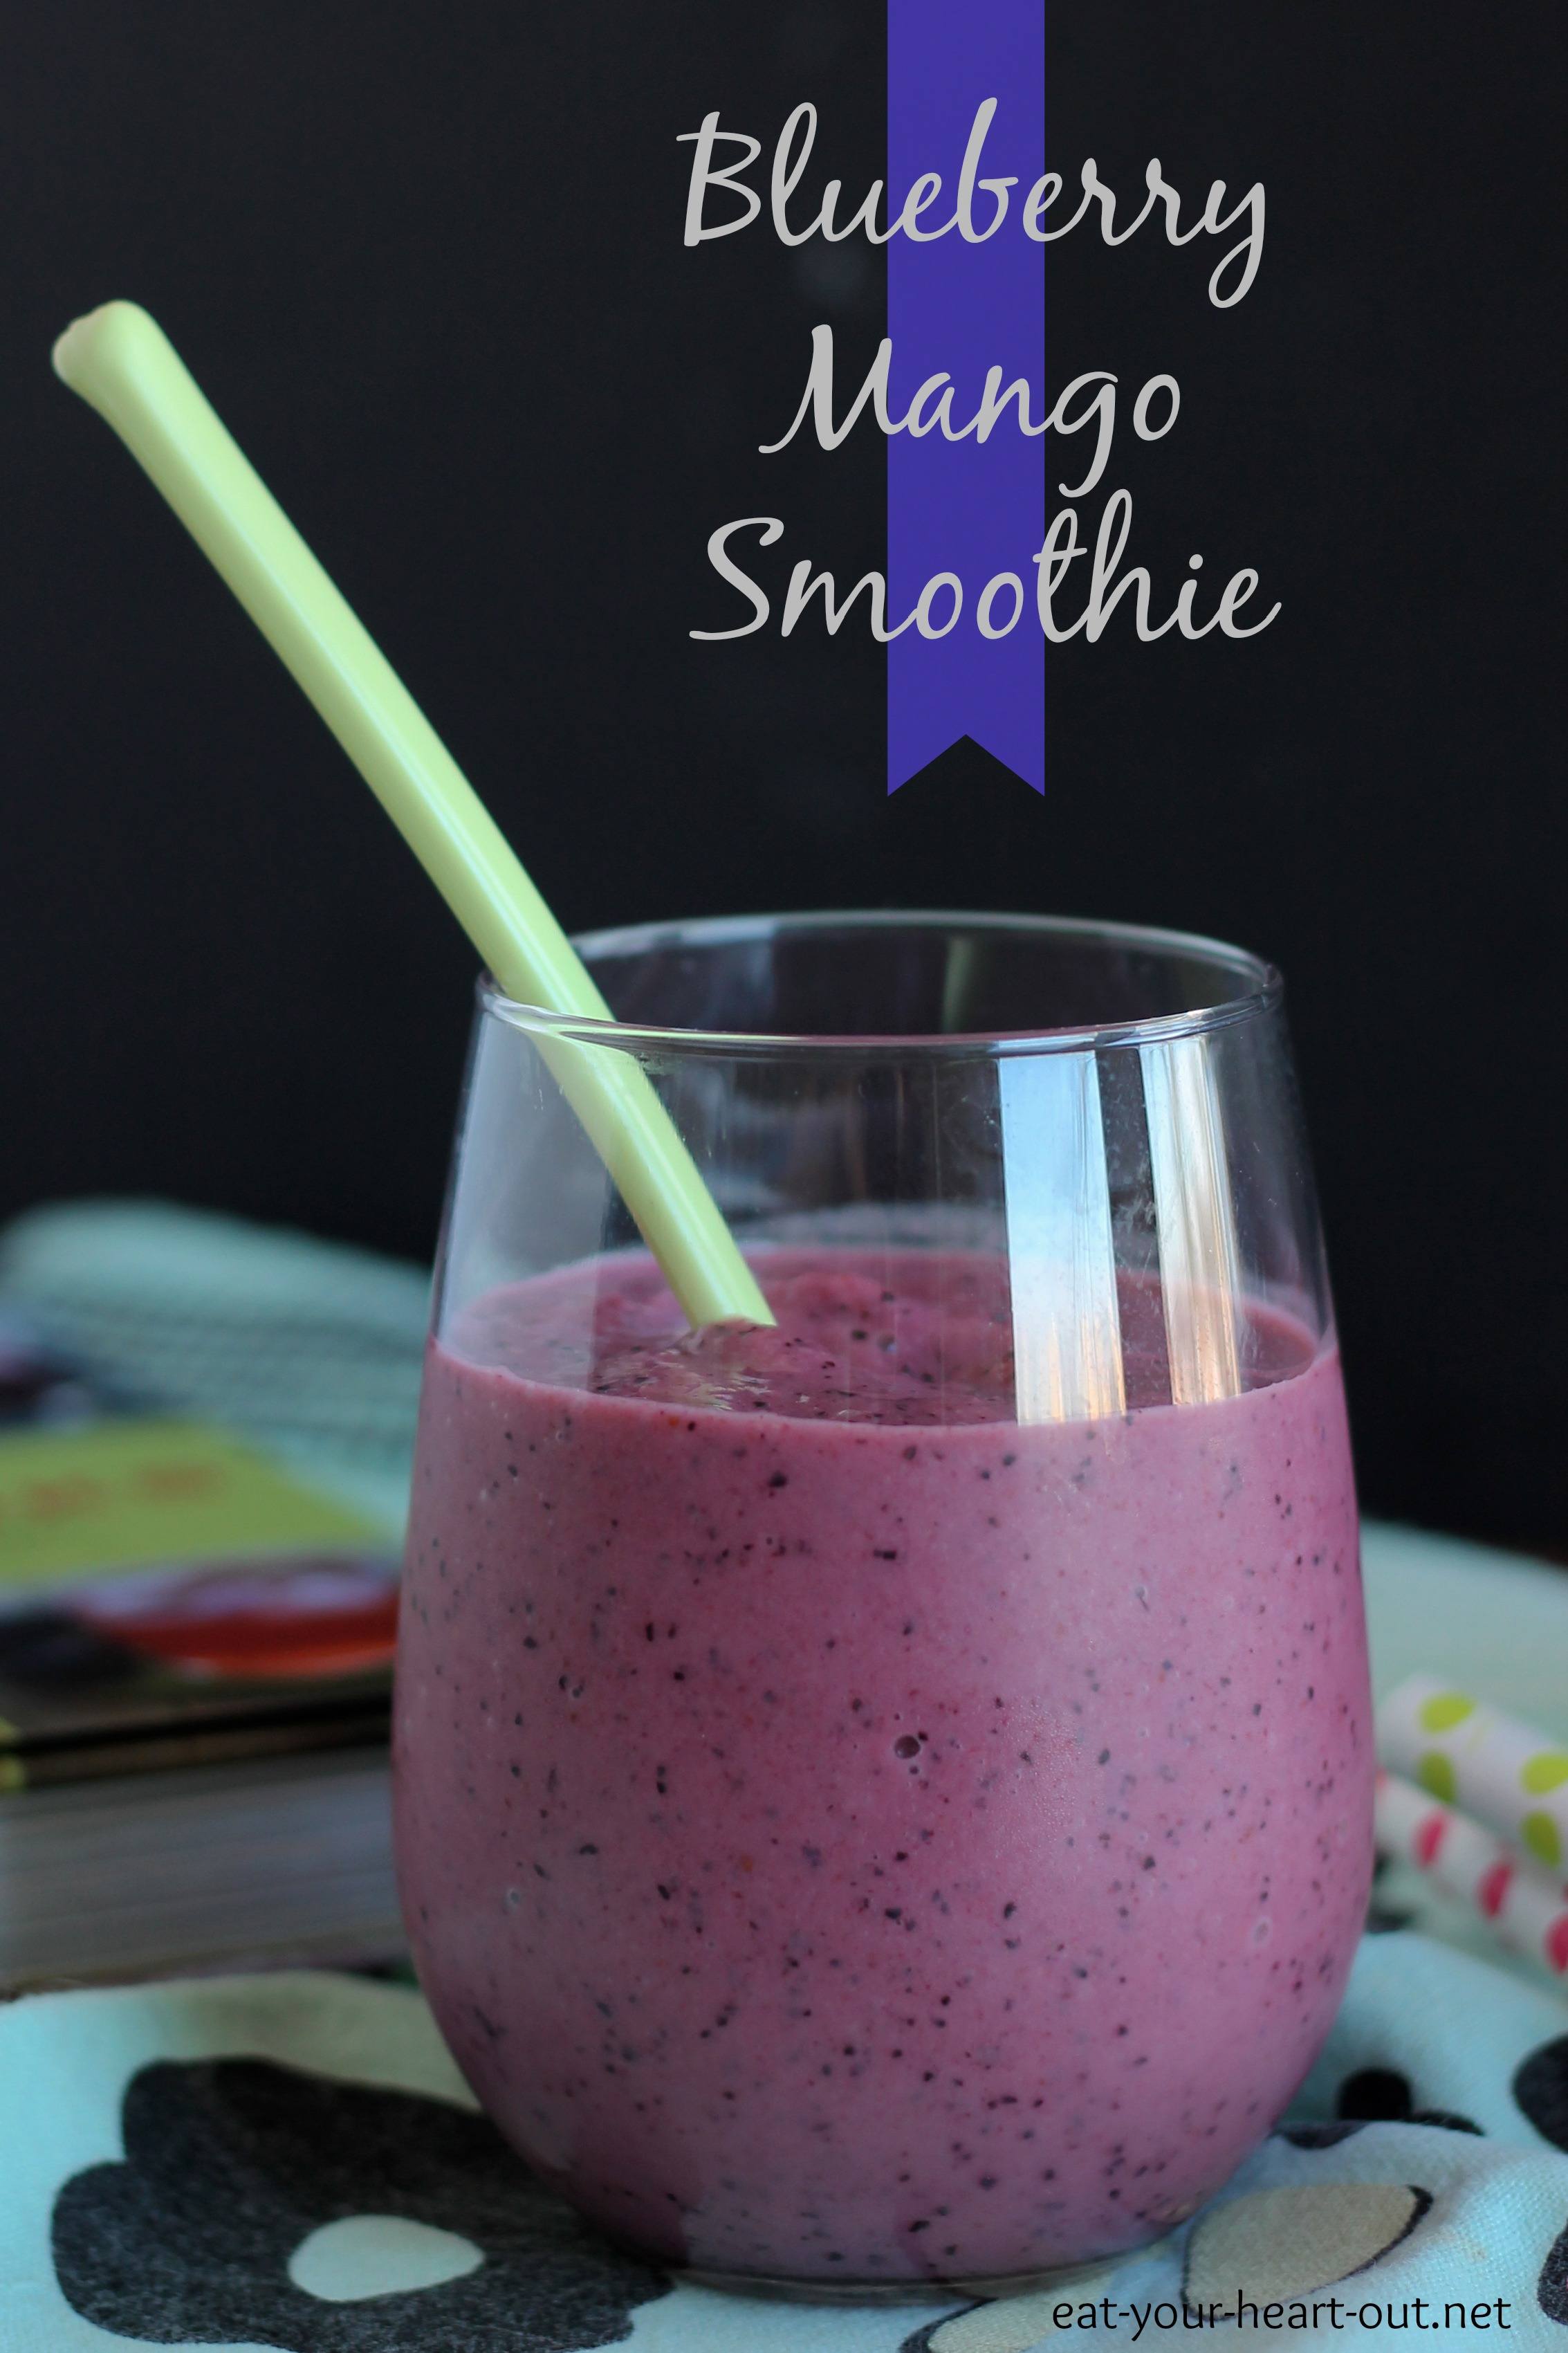 blueberry mango smoothie via Eat Your Heart Out